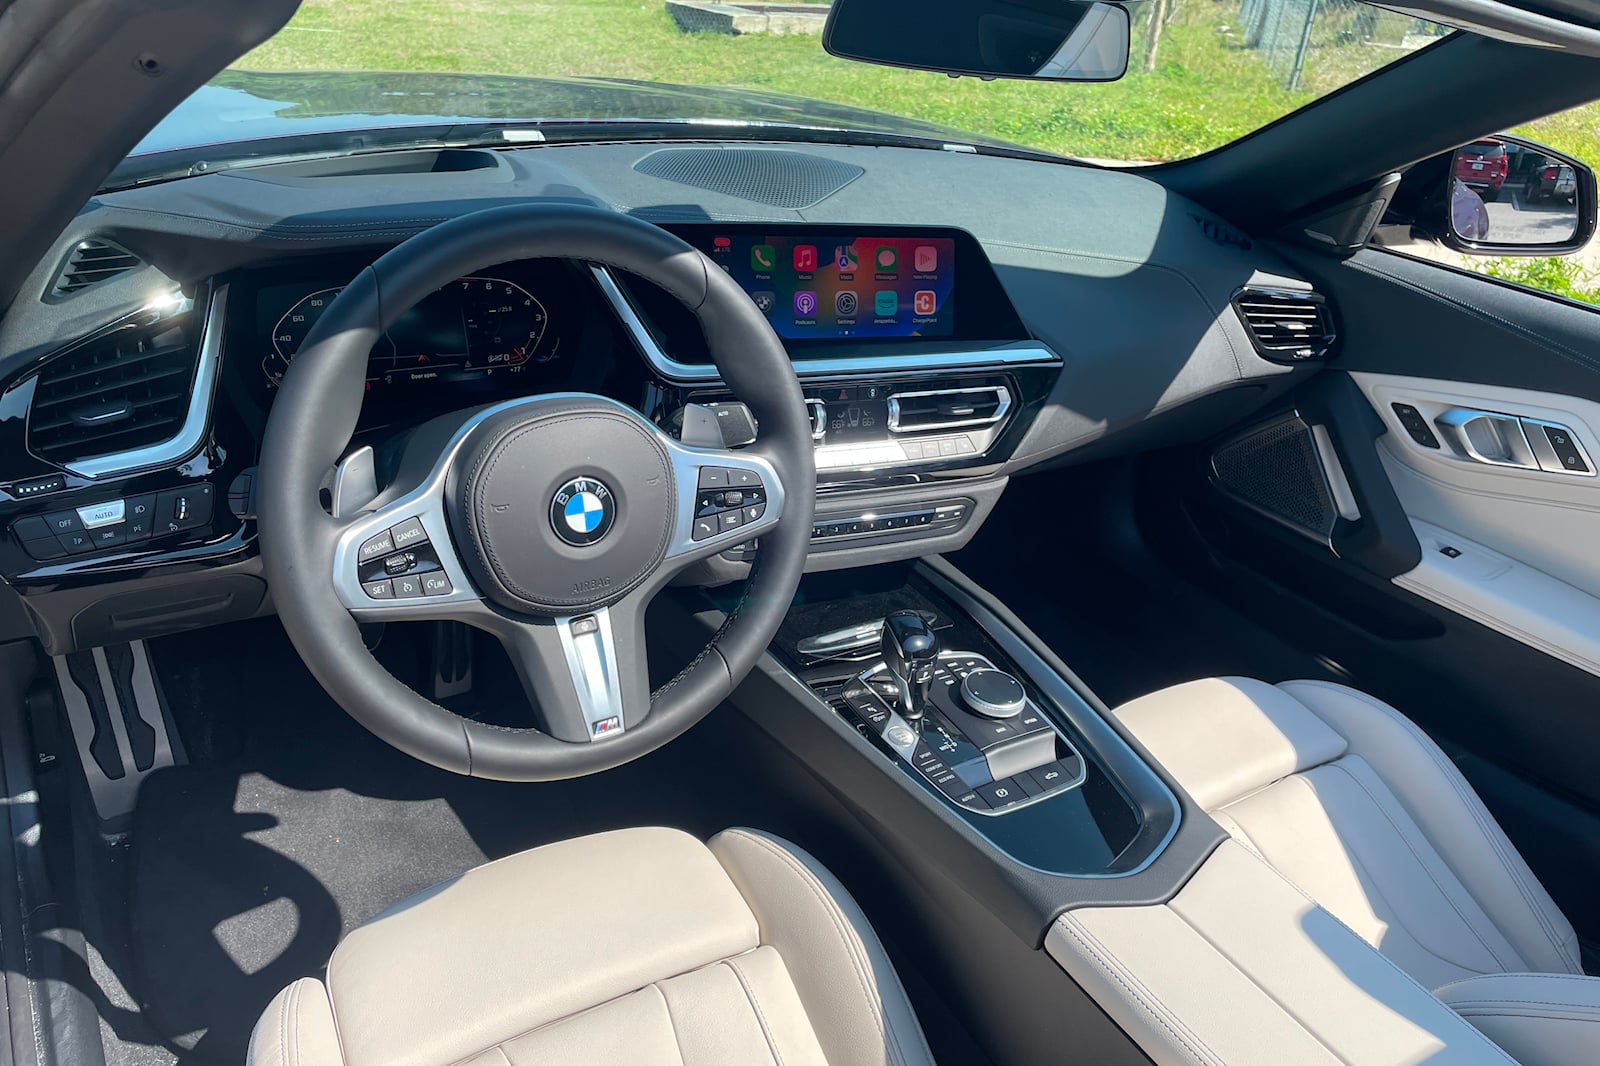 2023 Bmw Z4 Roadster Interior Dimensions: Seating, Cargo Space & Trunk Size  - Photos | Carbuzz